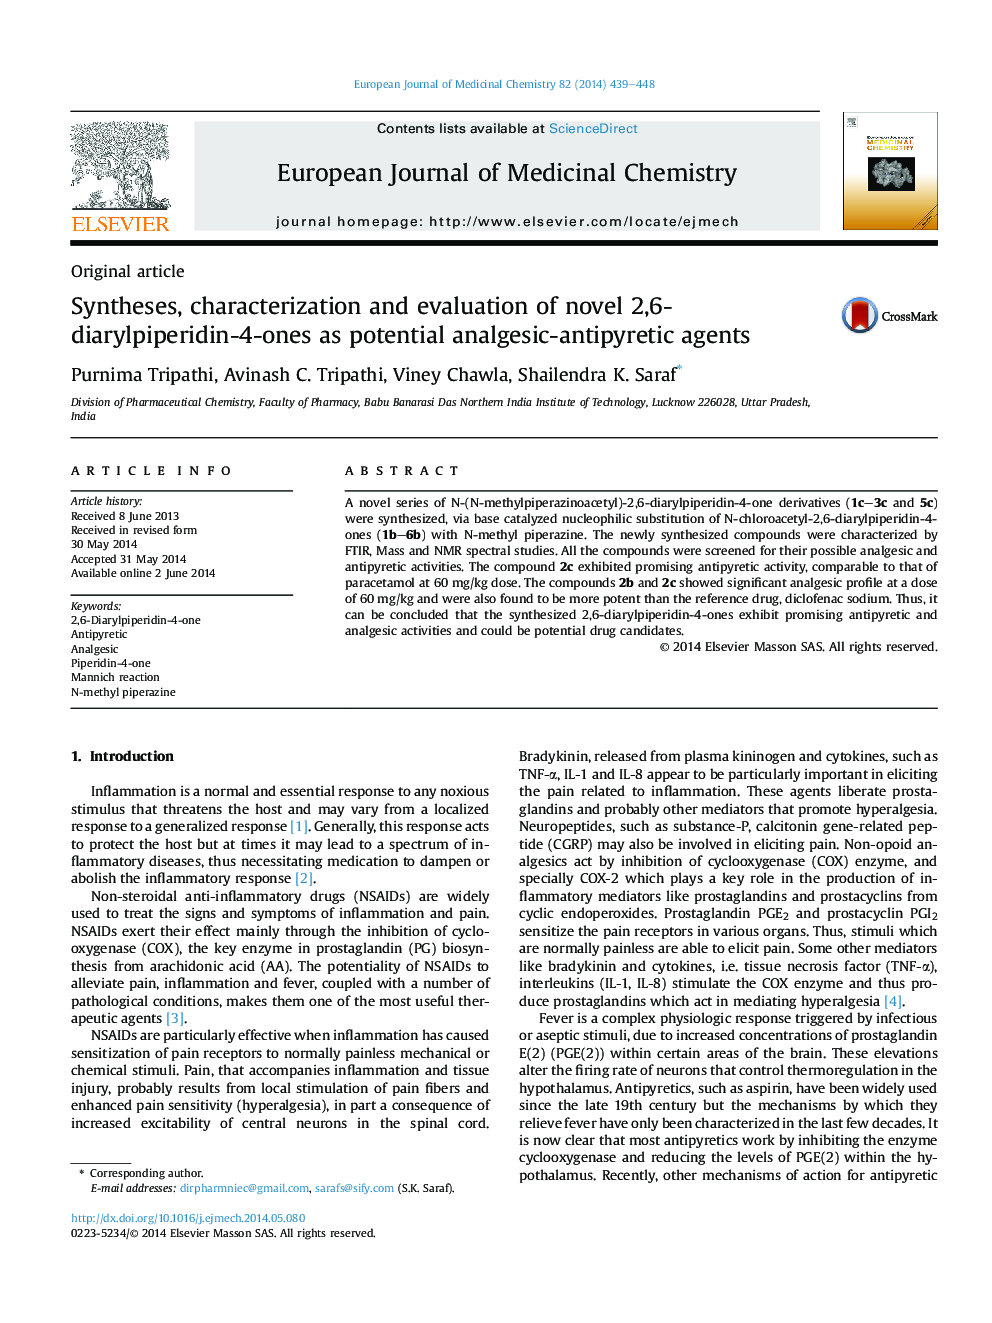 Syntheses, characterization and evaluation of novel 2,6-diarylpiperidin-4-ones as potential analgesic-antipyretic agents